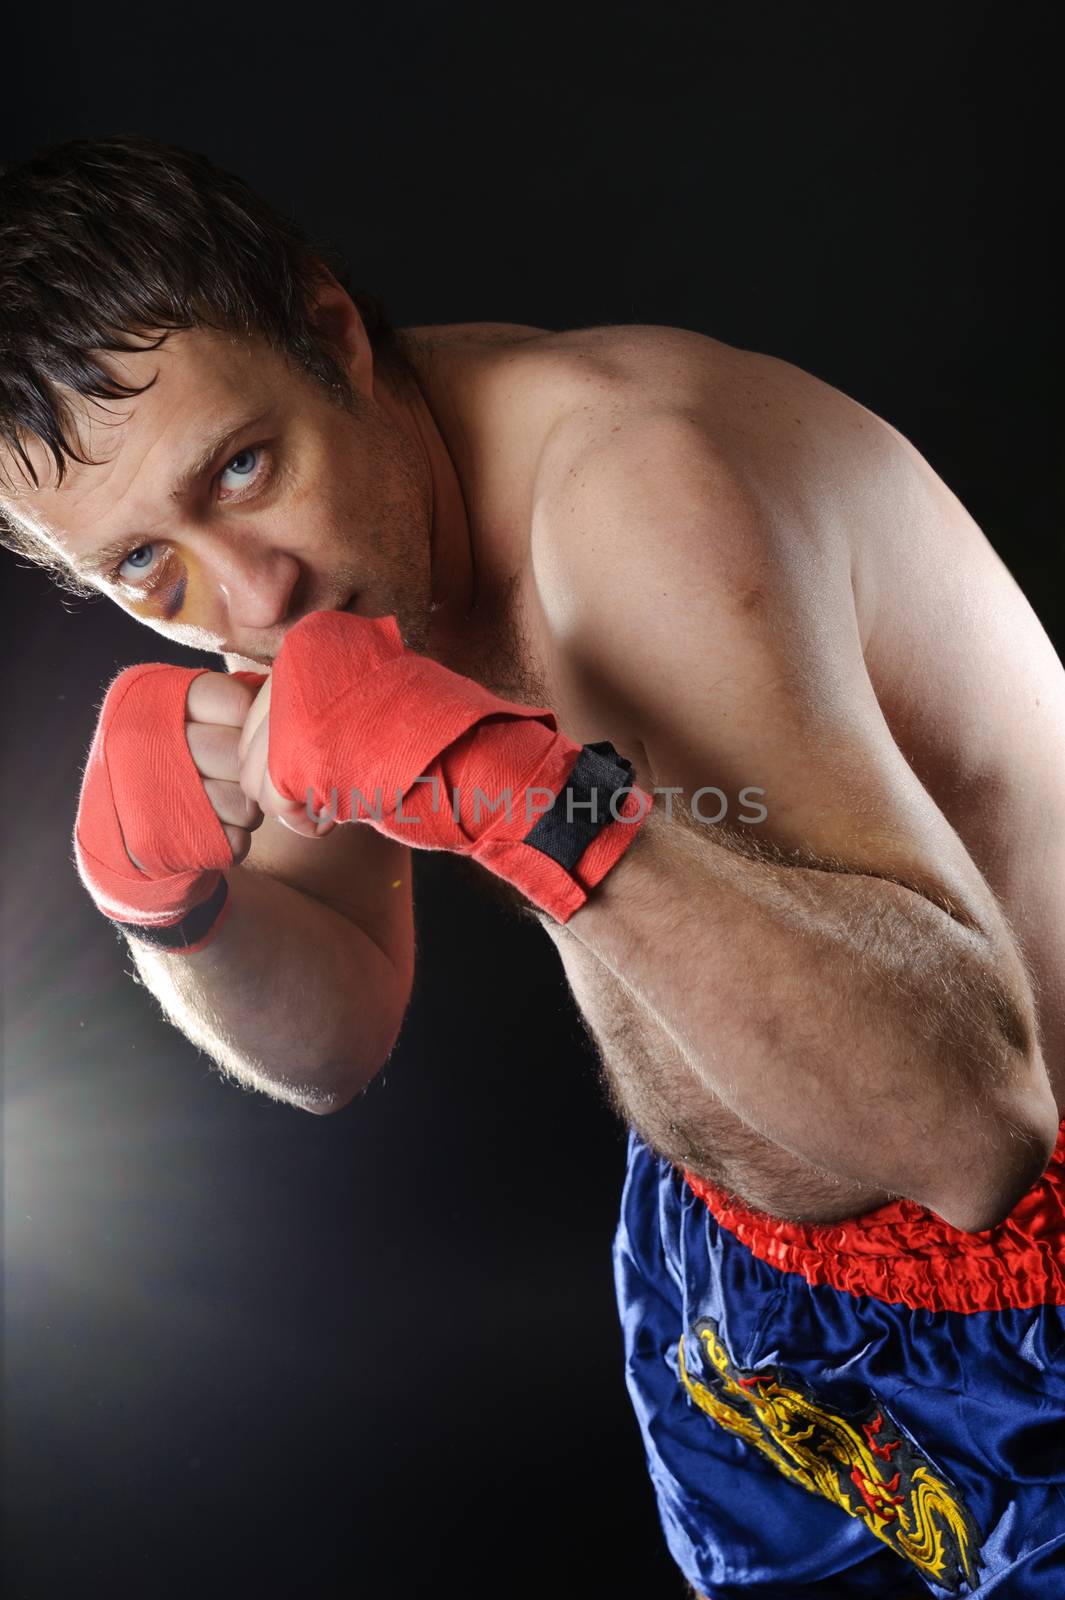 Boxer with a bruise in a battle position. Clenched fists. Dark background.